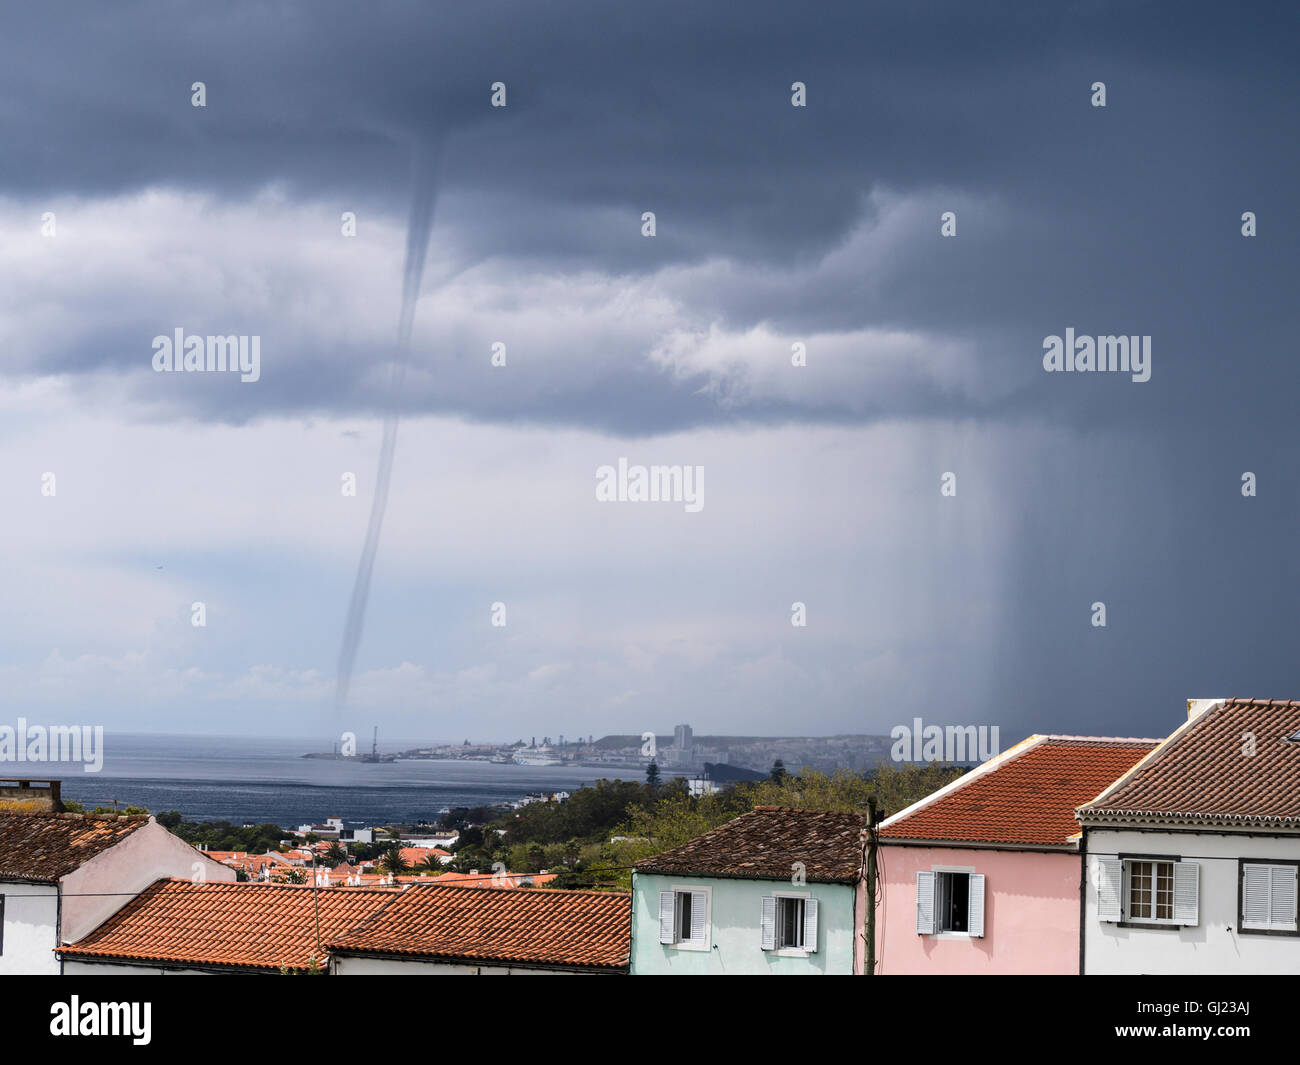 Waterspout over Ponta Delgada. A tornadic waterspout appears from the dark storm clouds in the ocean just beyond the city centre Stock Photo